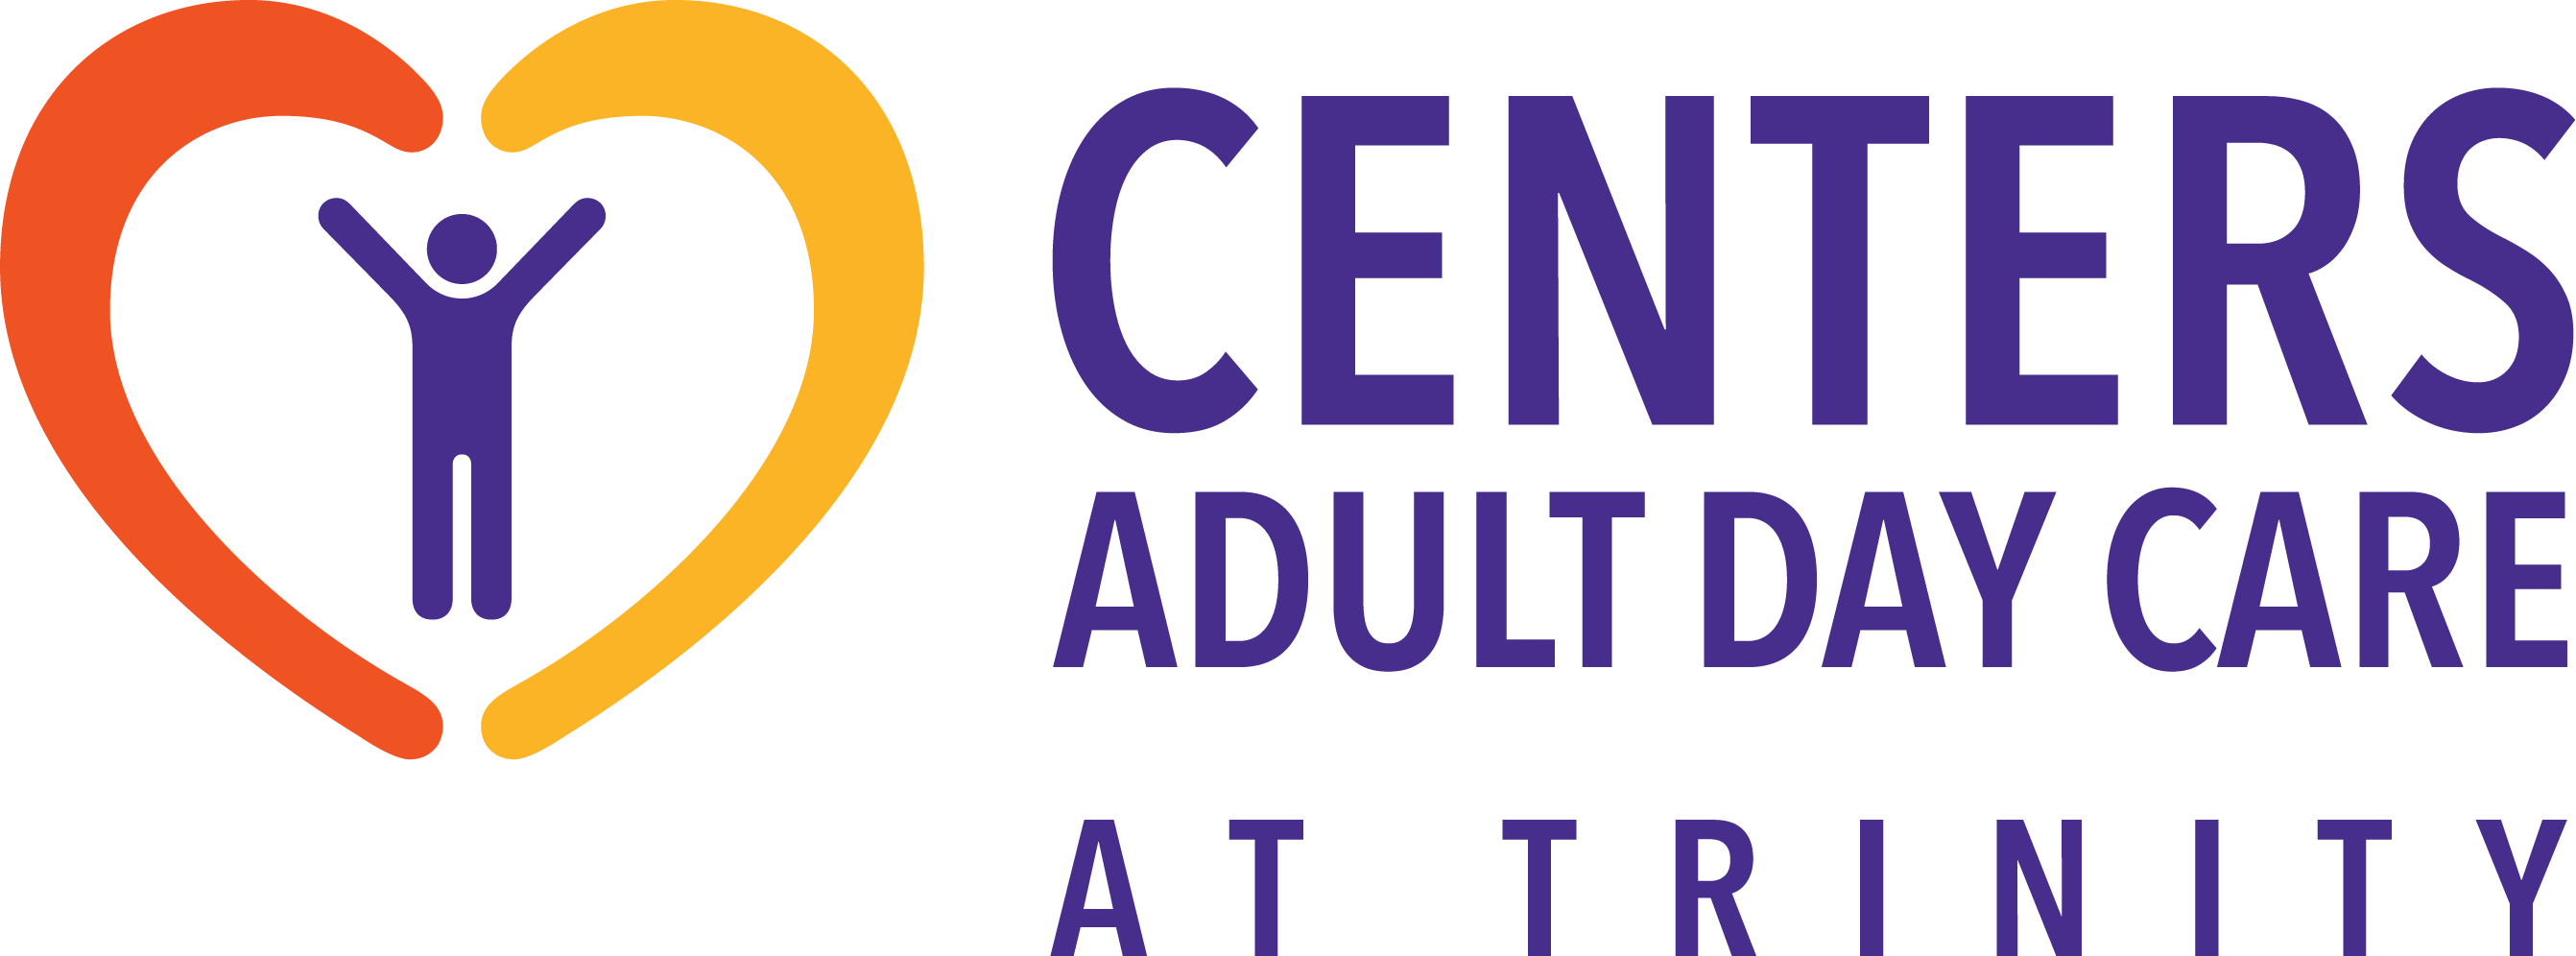 Centers Adult Day Care at Trinity Center logo